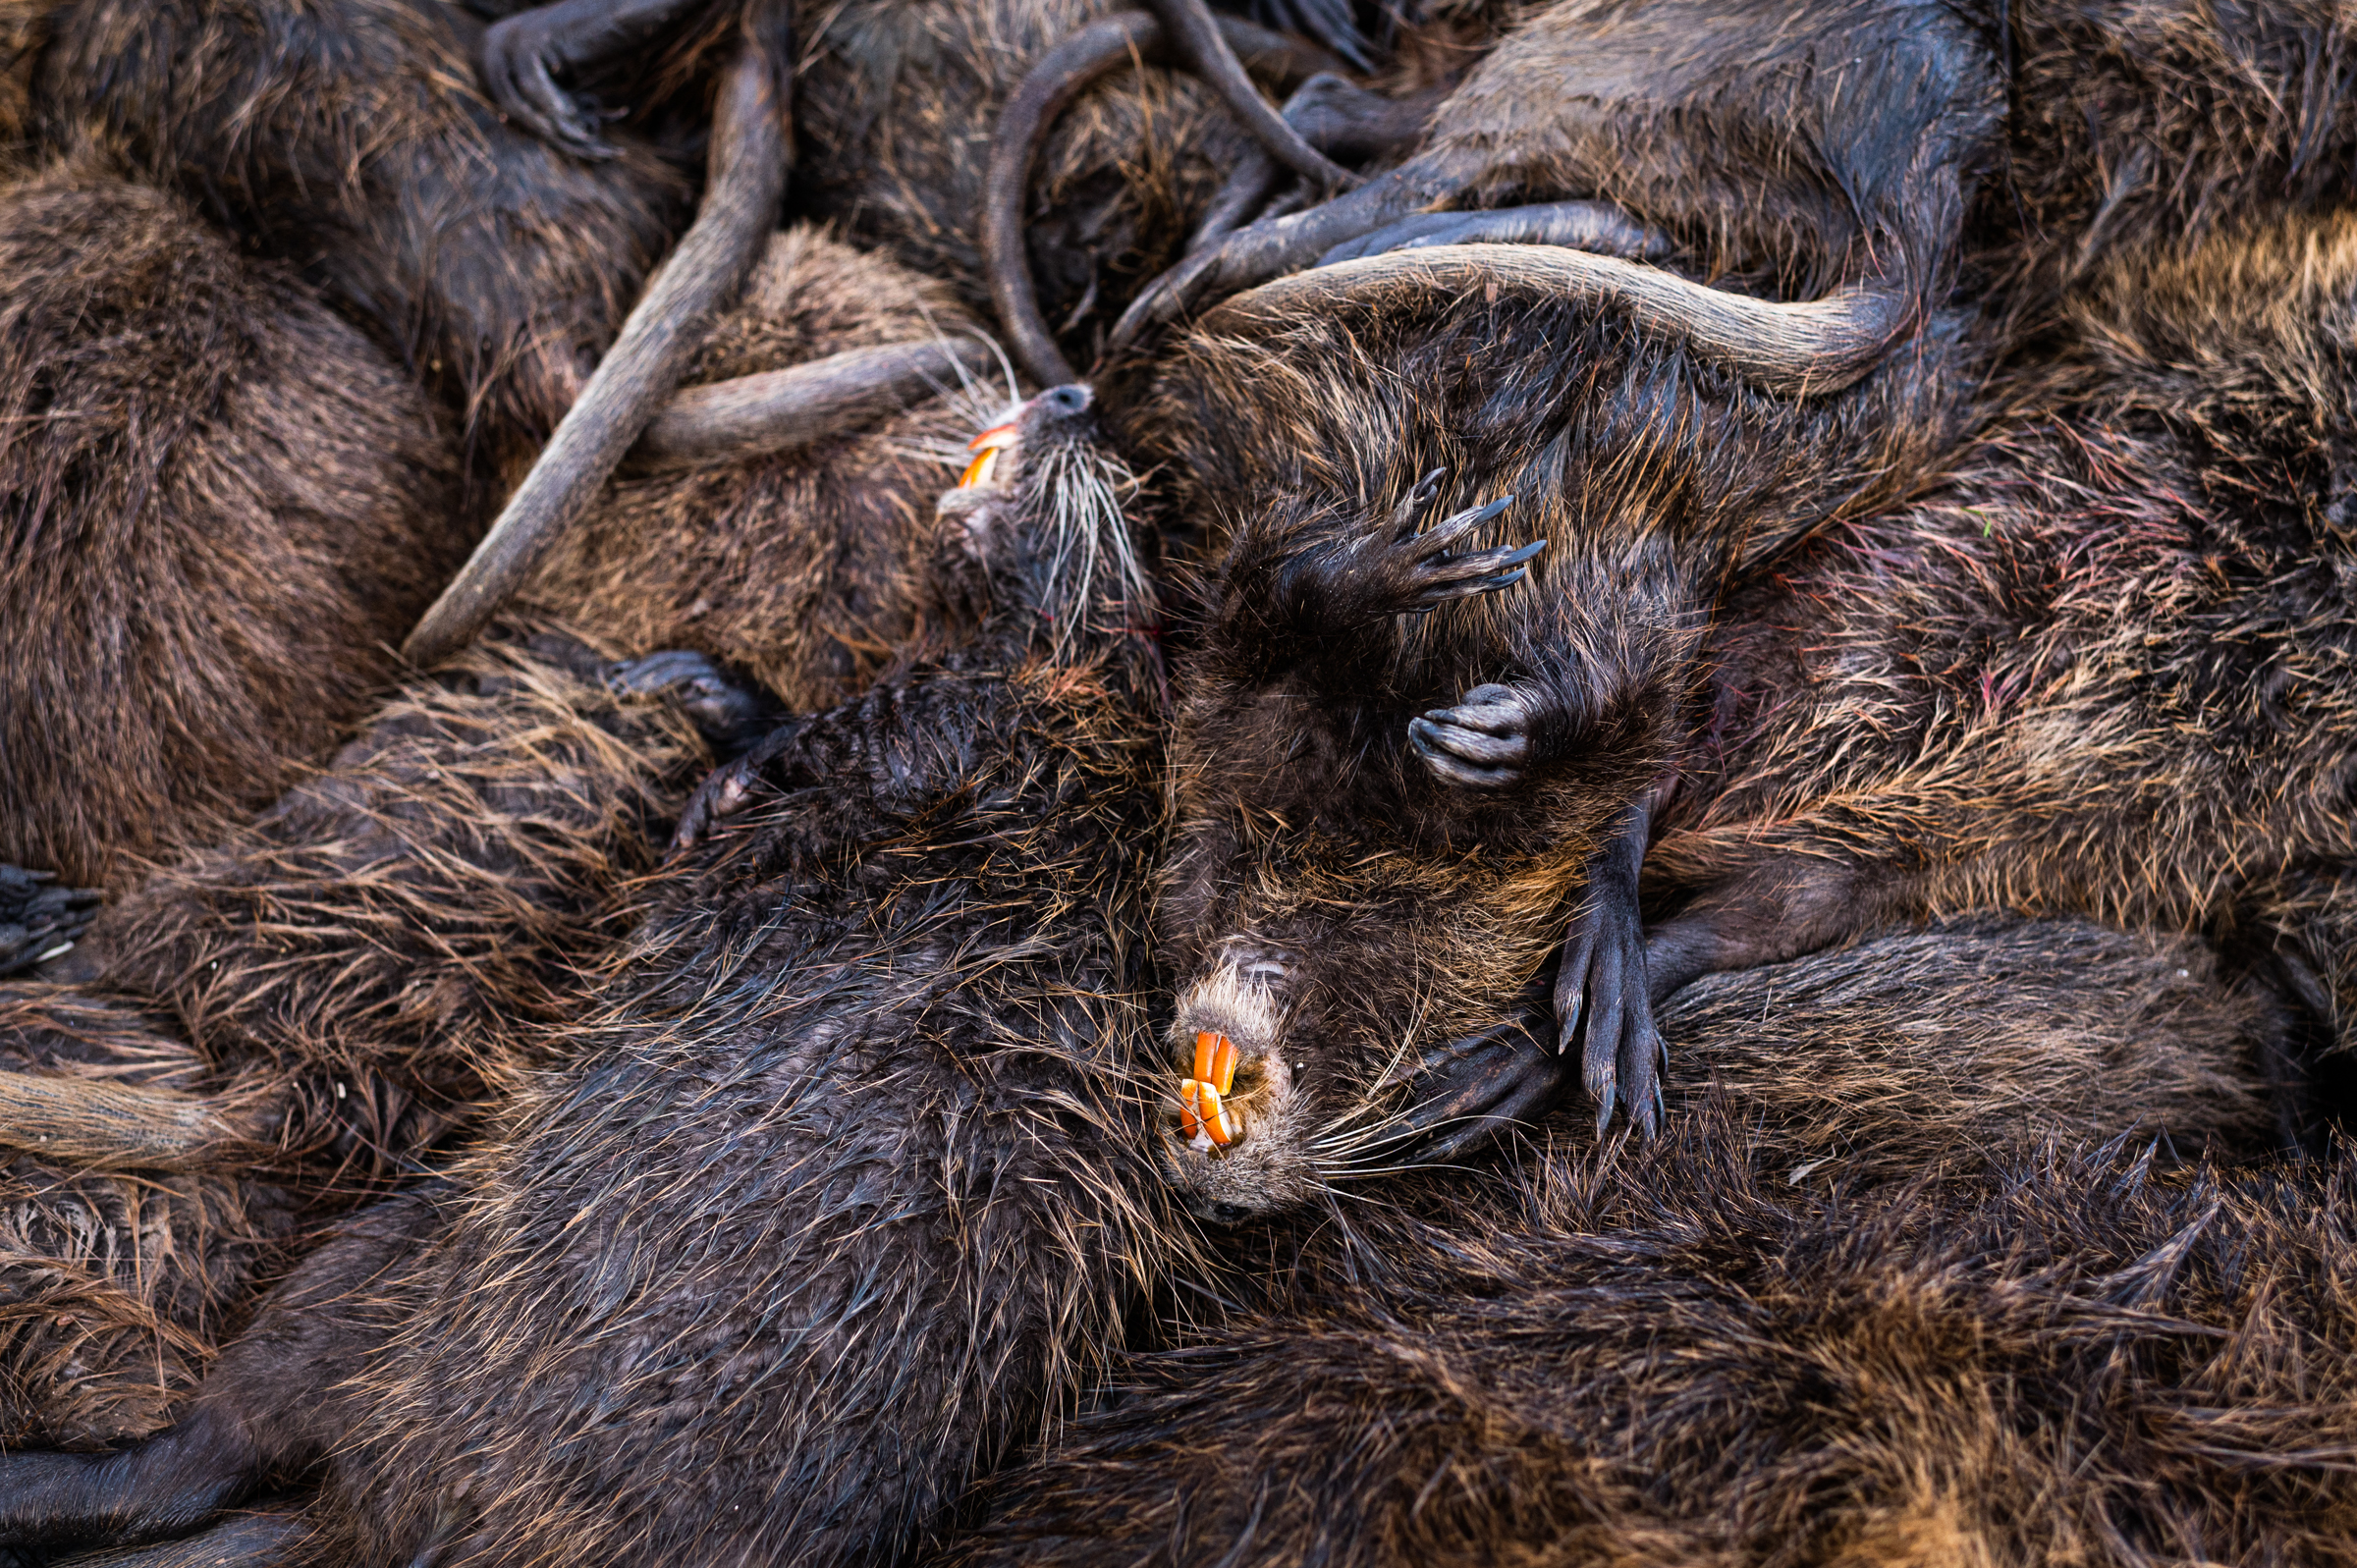 The notable yellow teeth can be seen in a pile of dead nutria